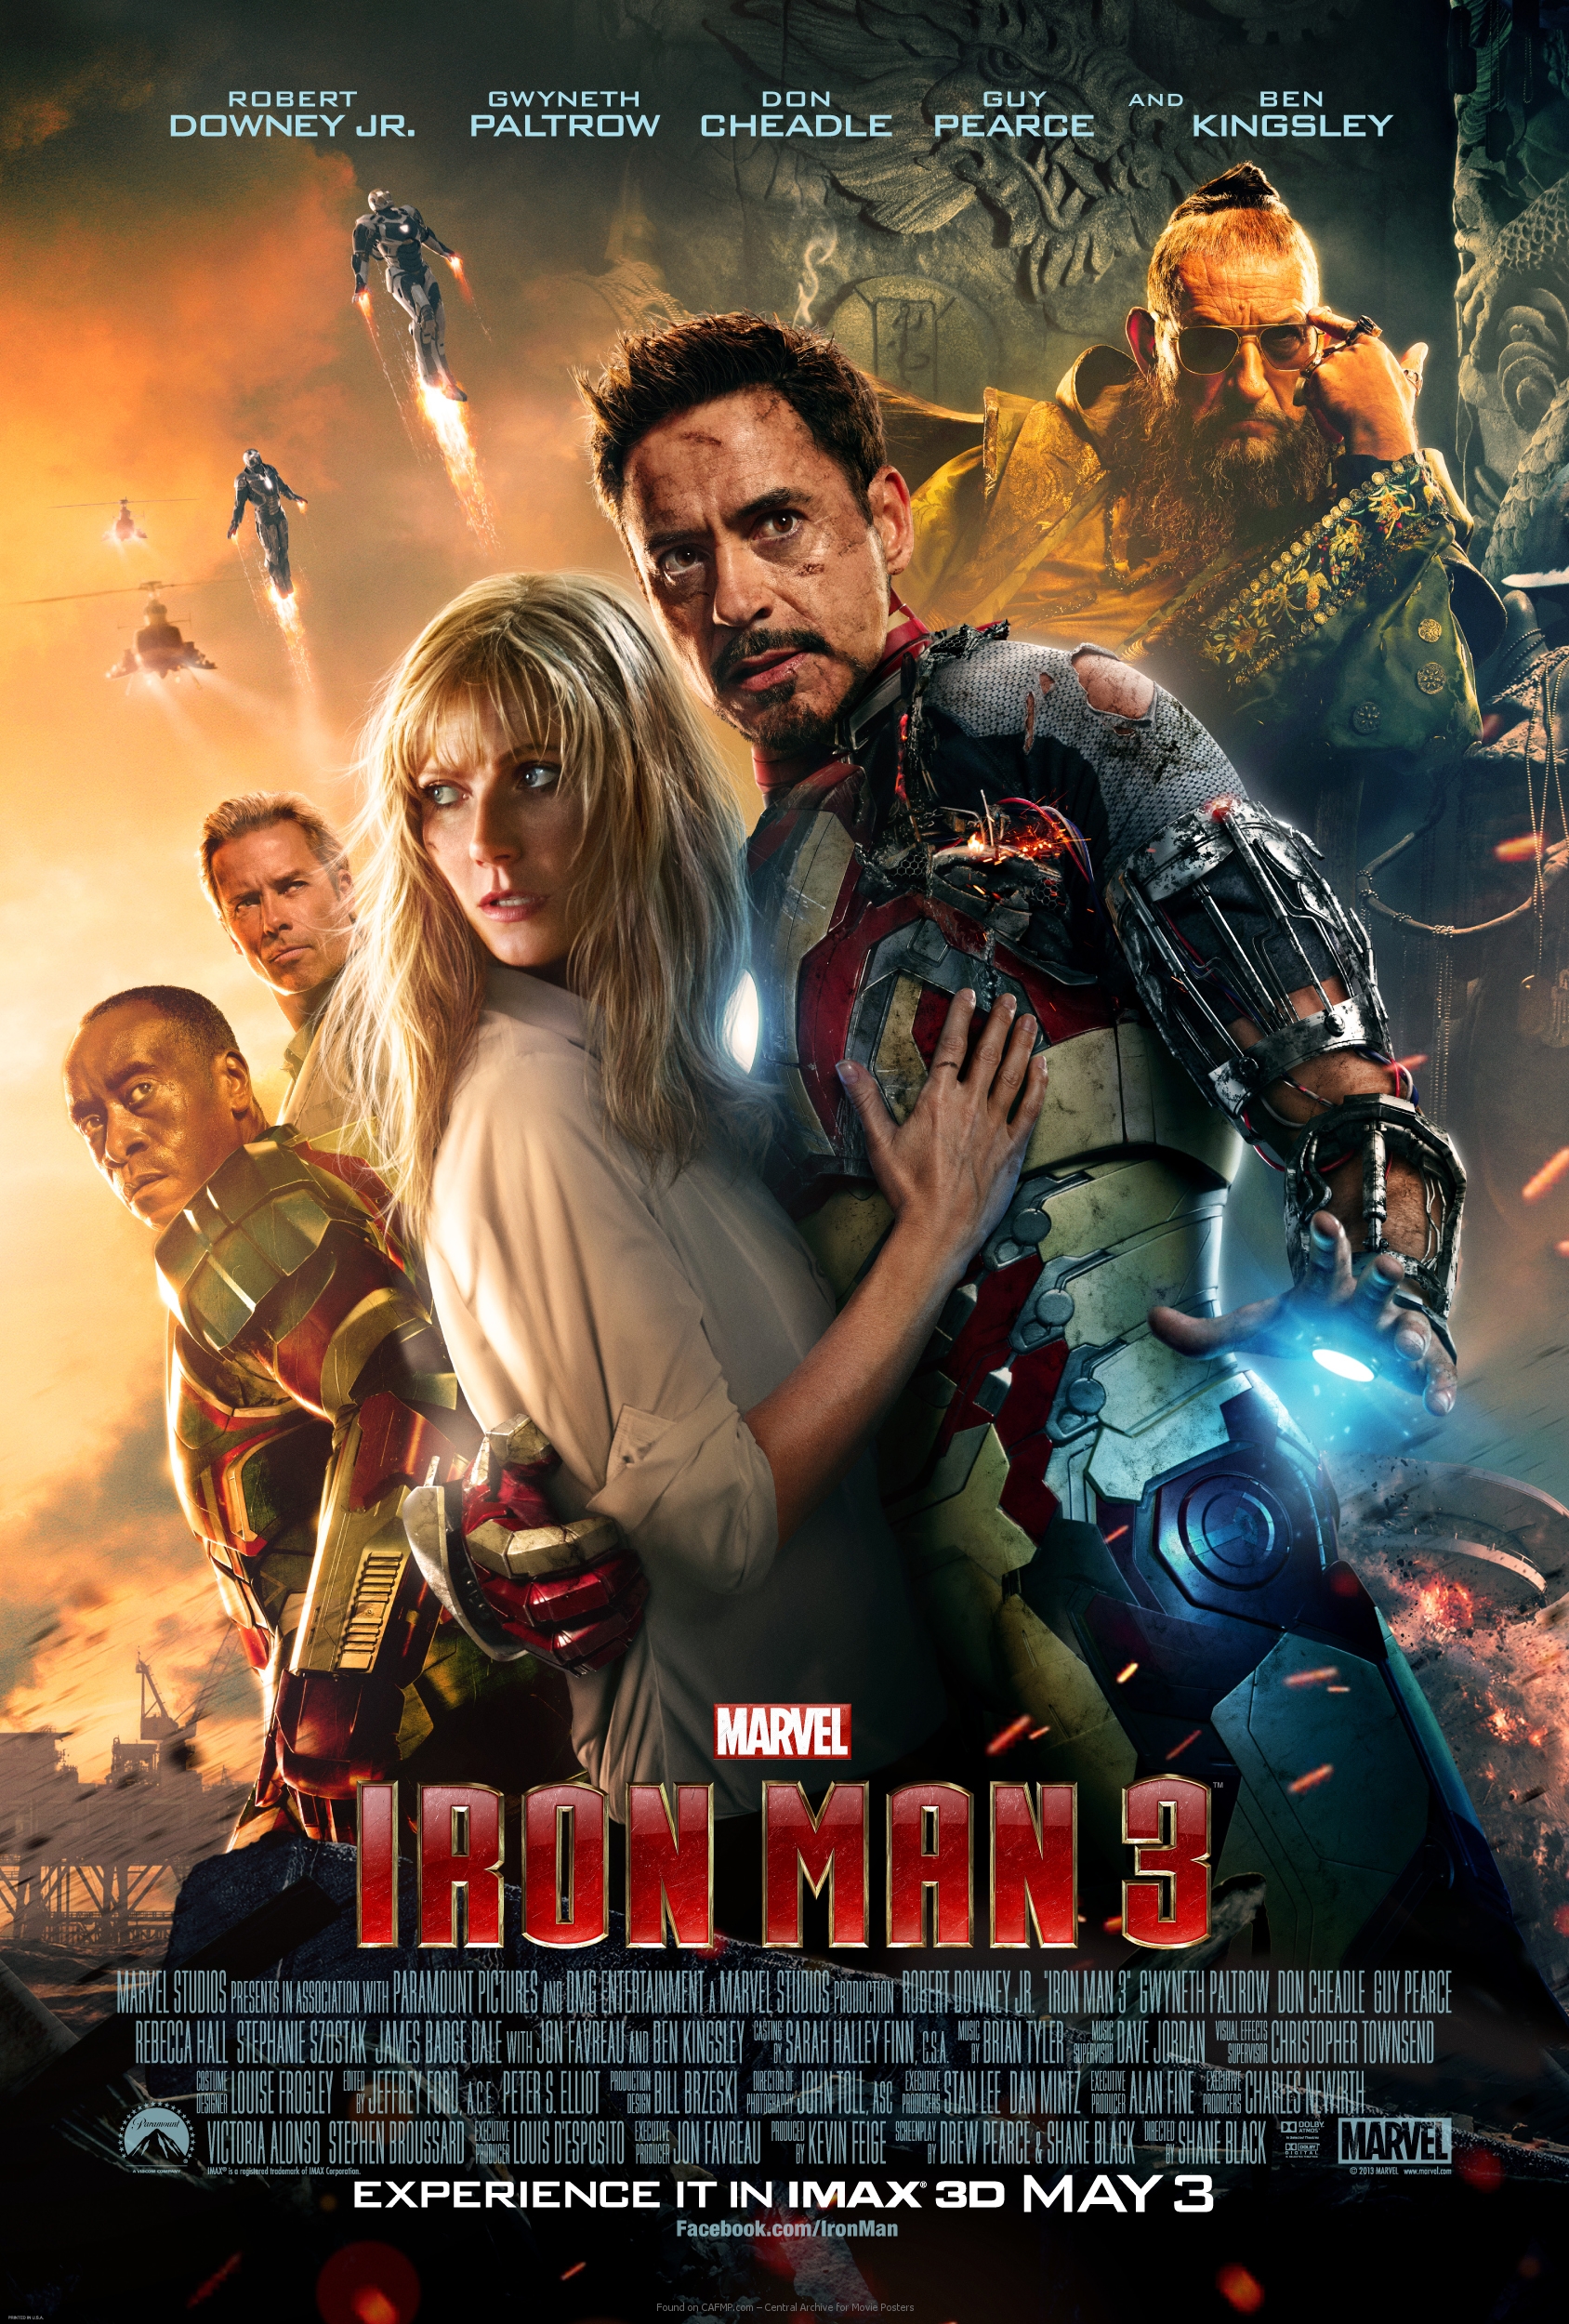 iron man 1 full movie free no download or registration